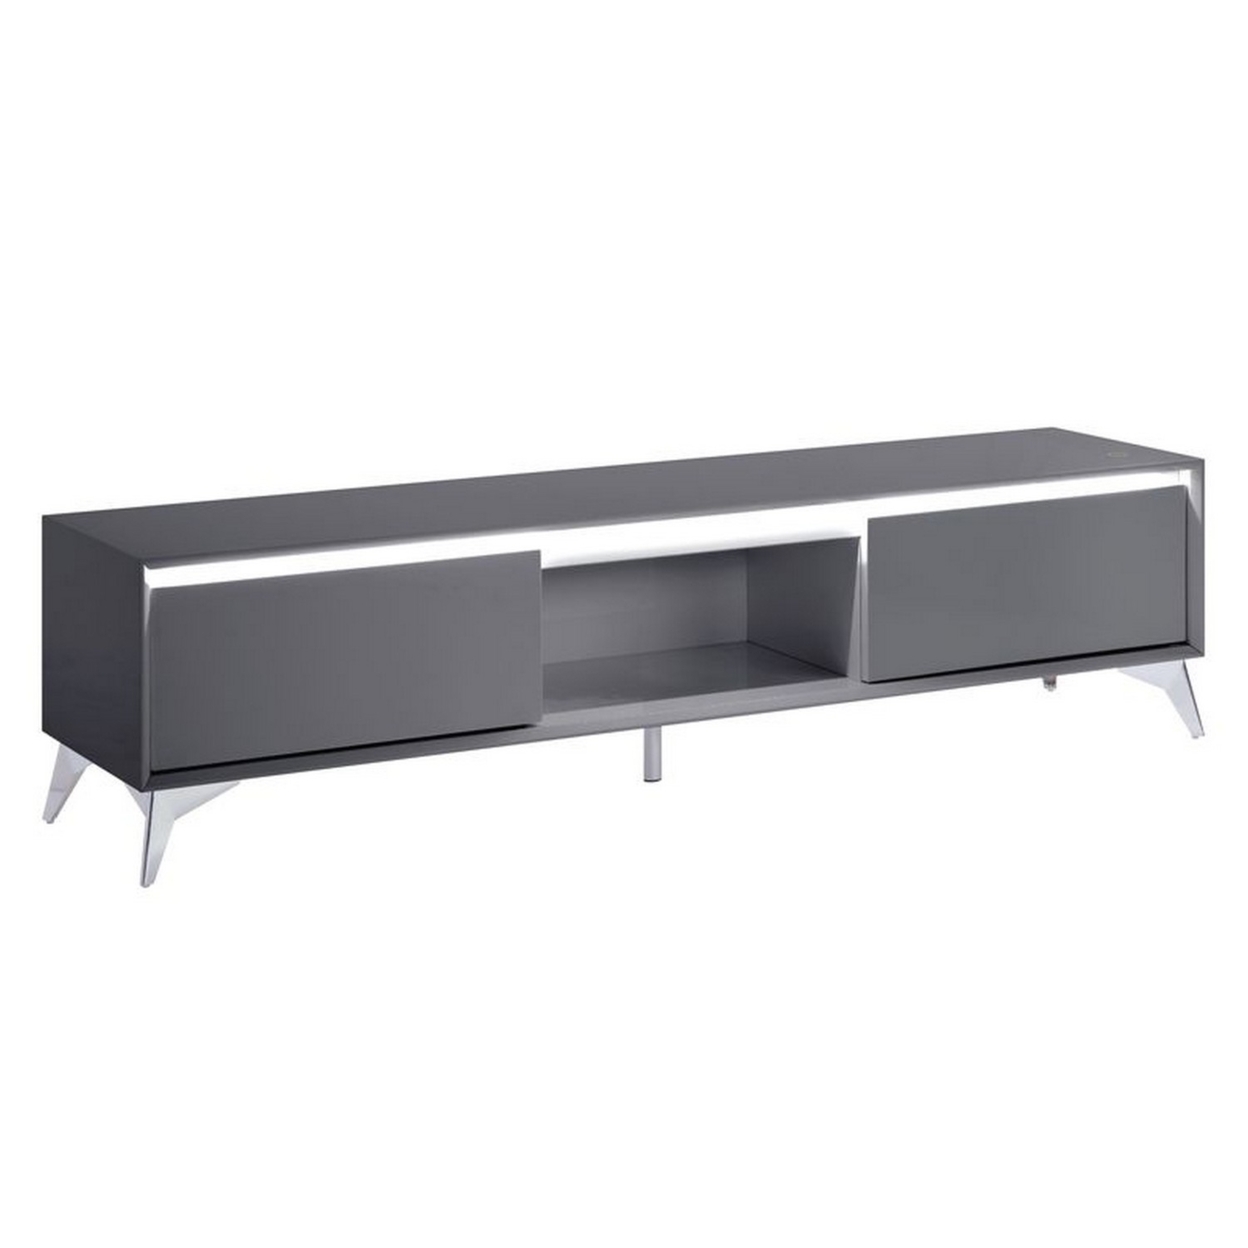 TV Stand With 2 Door Storage And LED Touch Light, Gray- Saltoro Sherpi